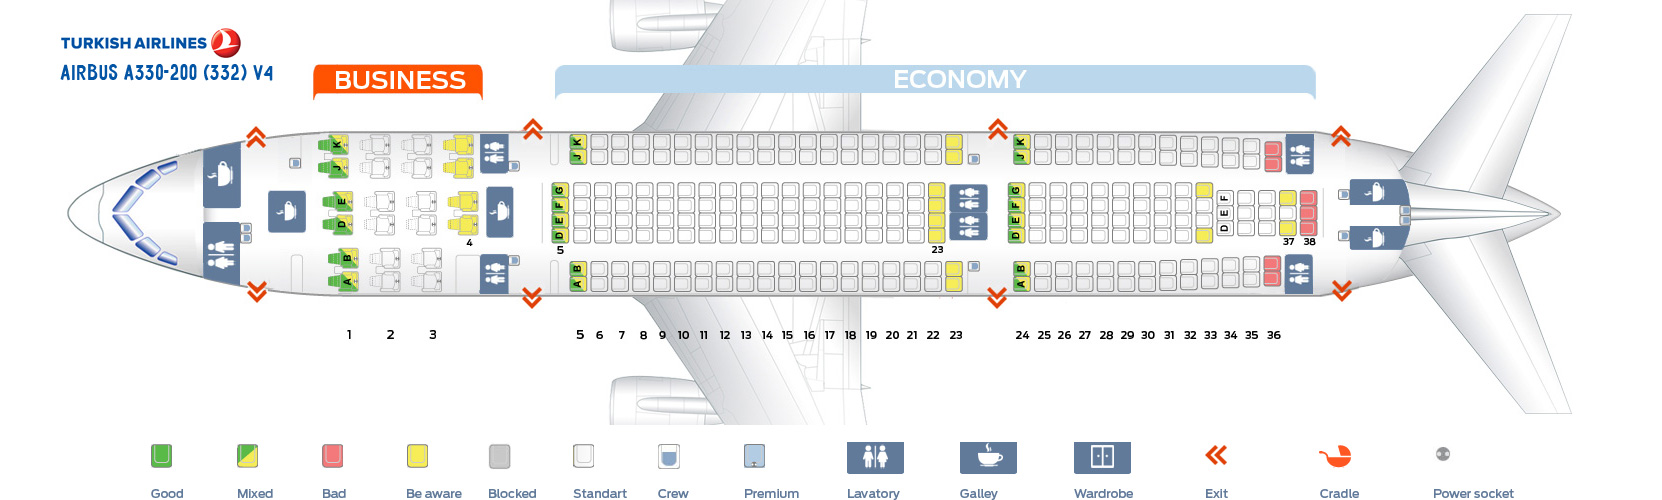 Airbus A330 220 Seating Chart